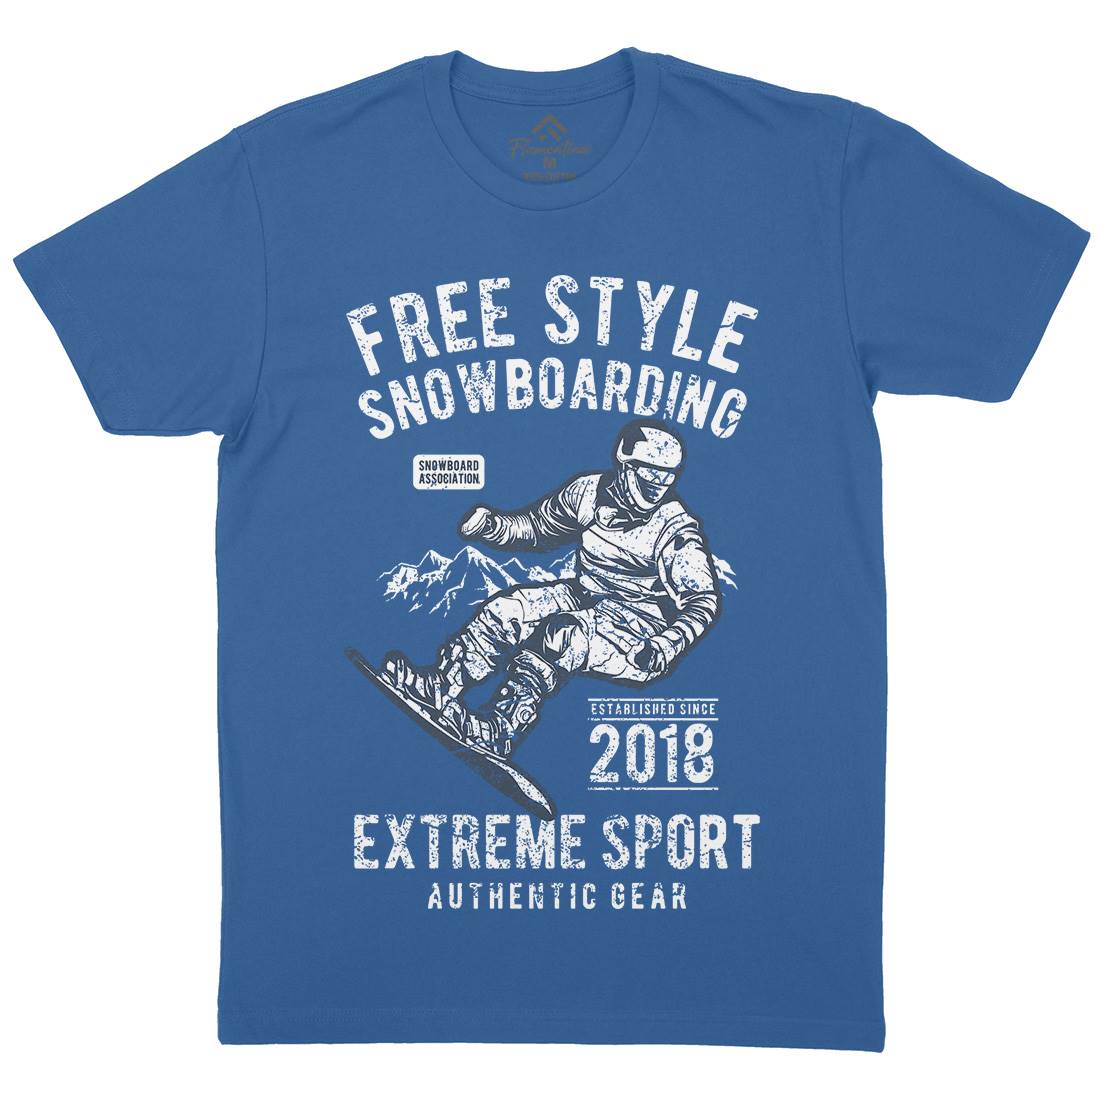 Free Style Snowboarding Mens Crew Neck T-Shirt Sport A666